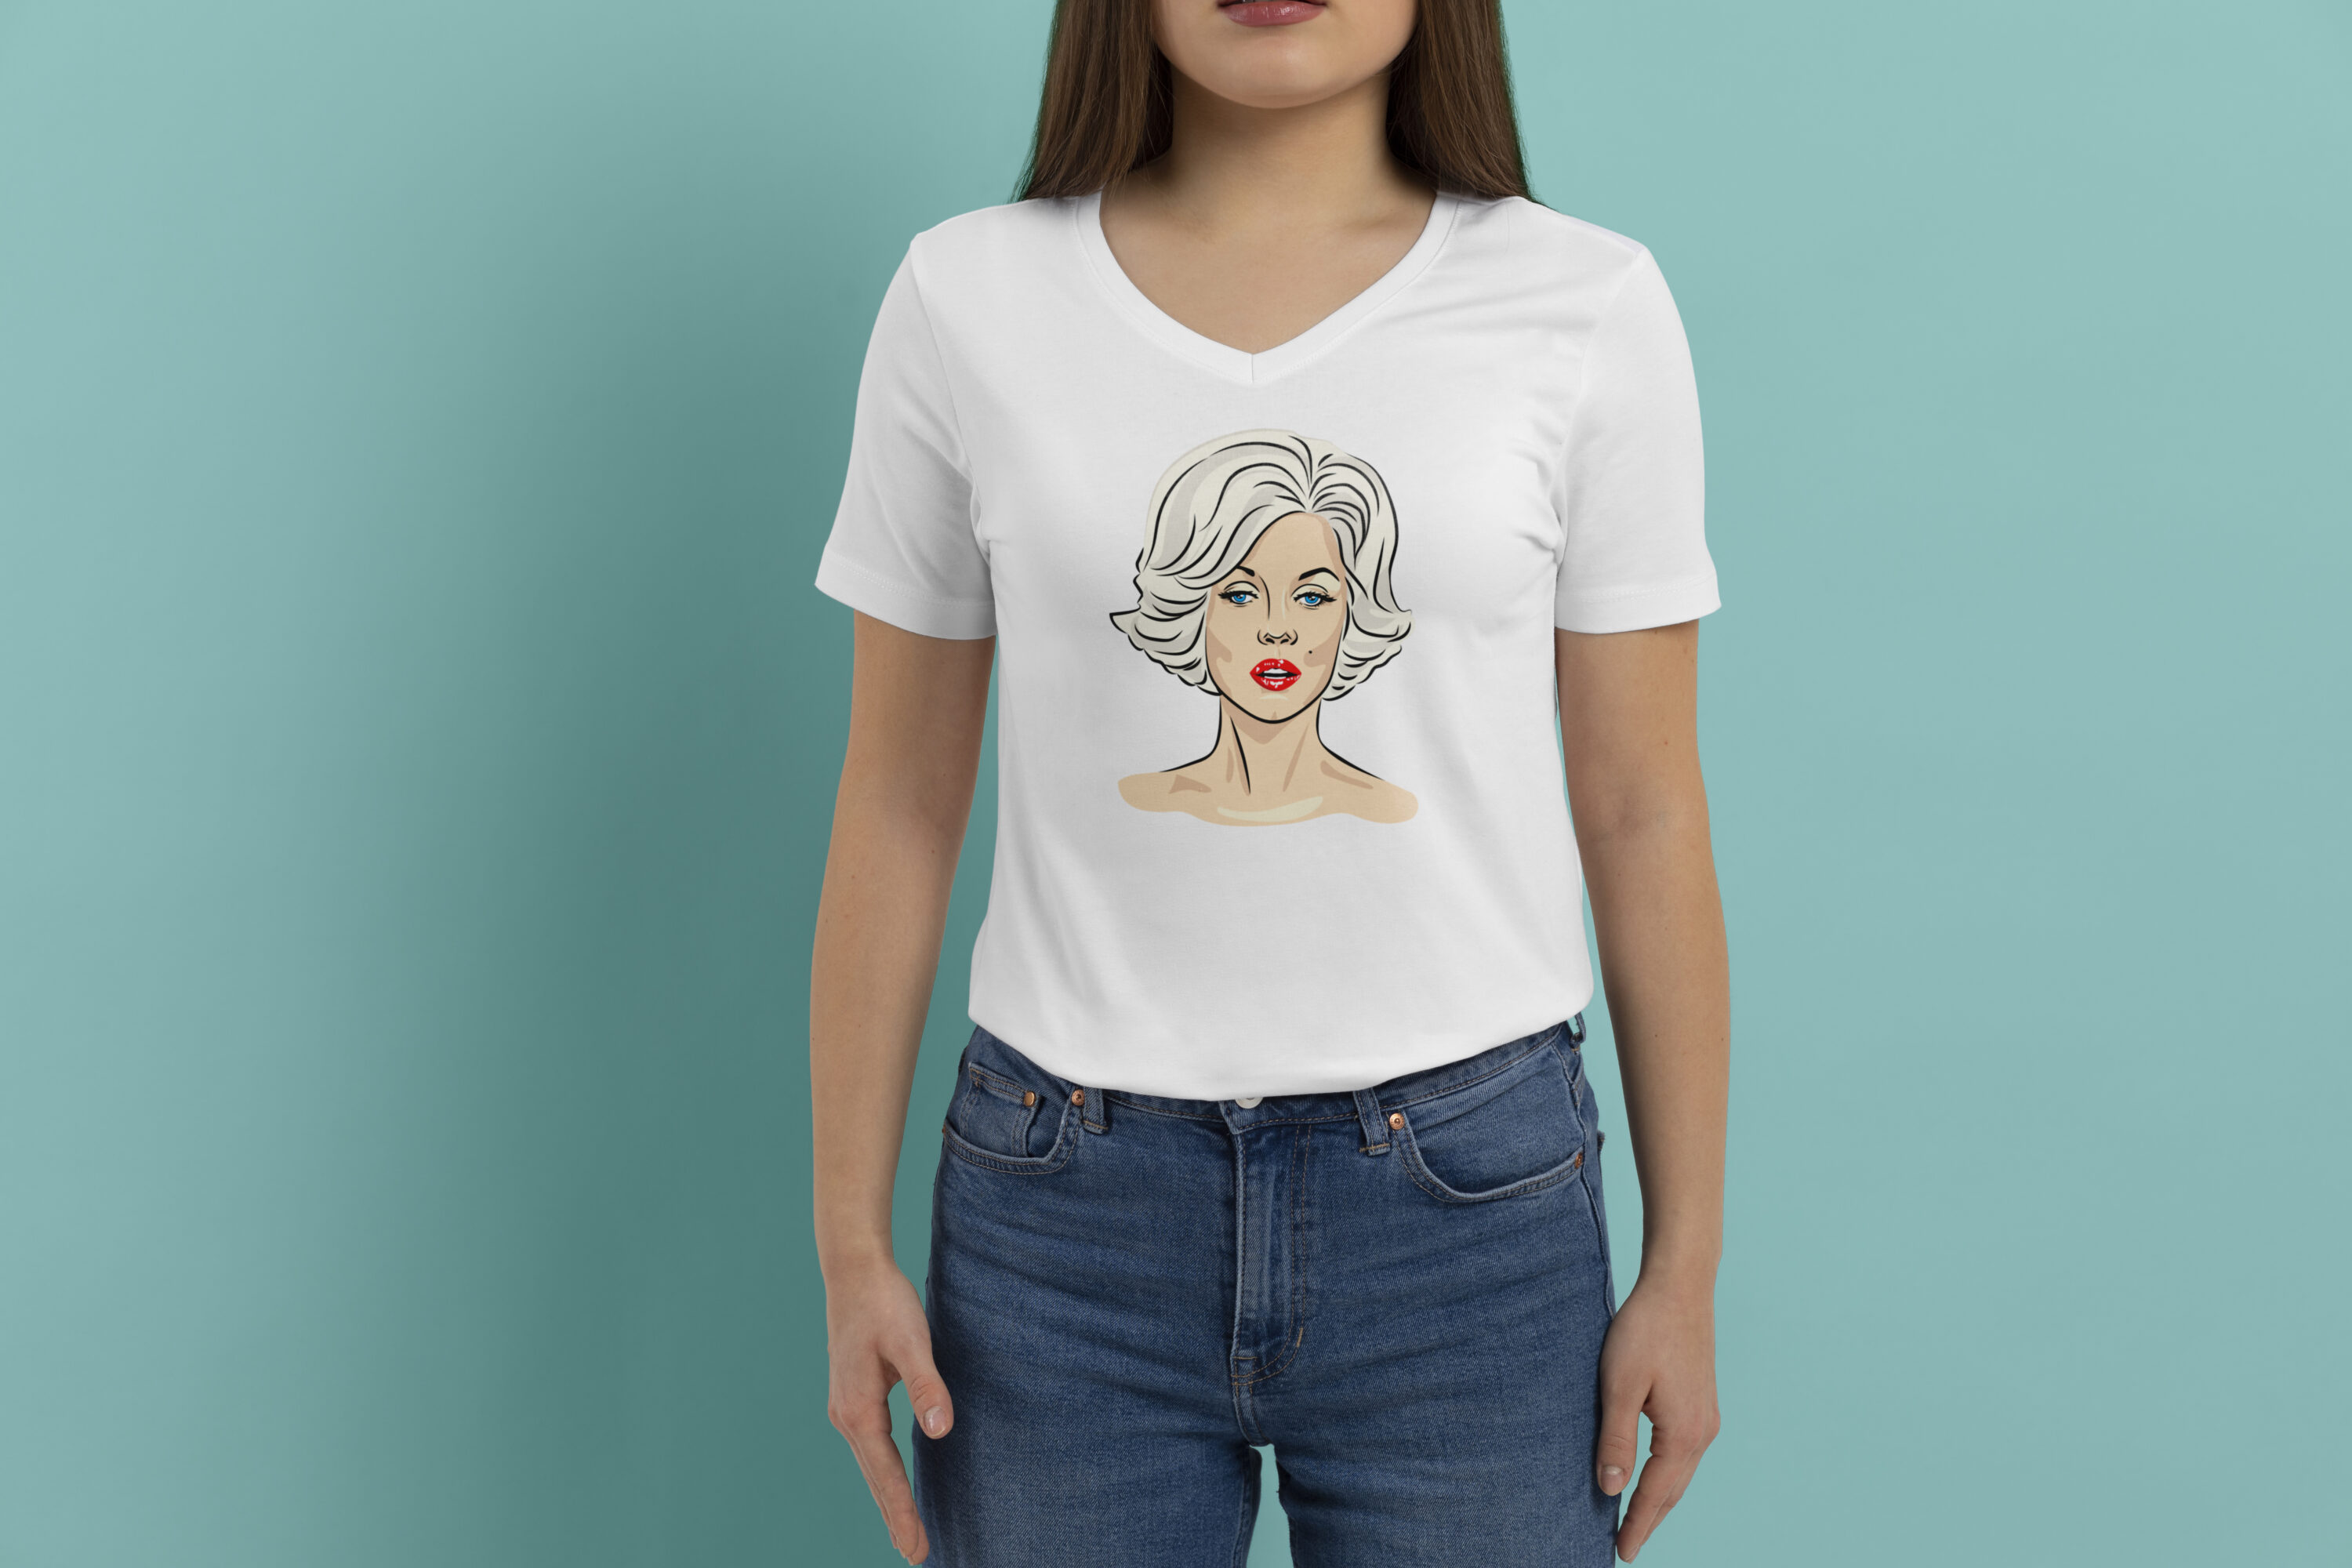 Image of white t-shirt with cute Marilyn Monroe print.